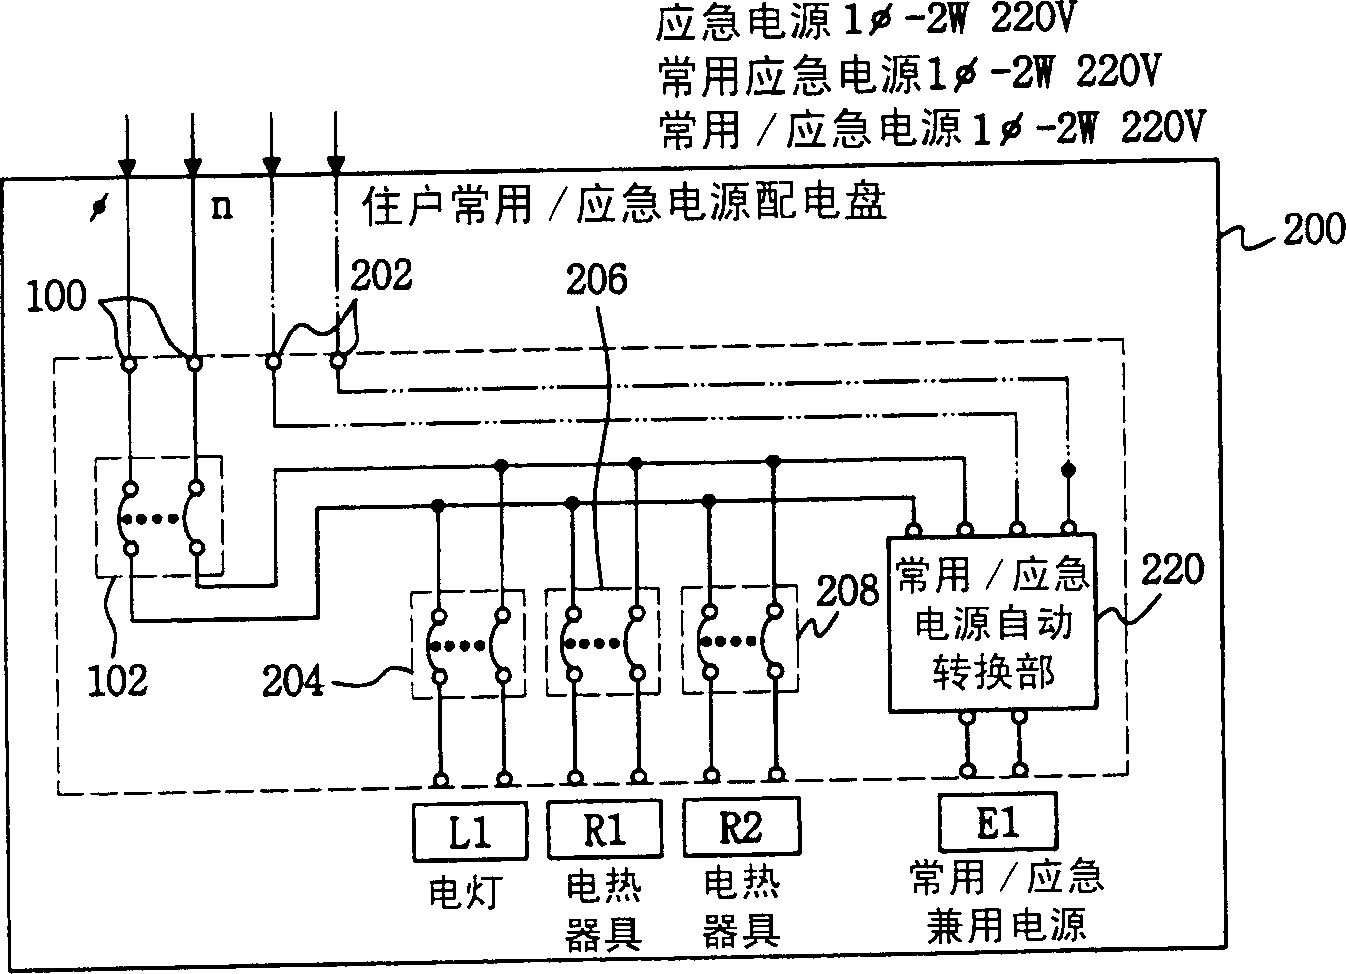 Unit resident normal/ emergency power supply switch board and its power supply automatic converting device